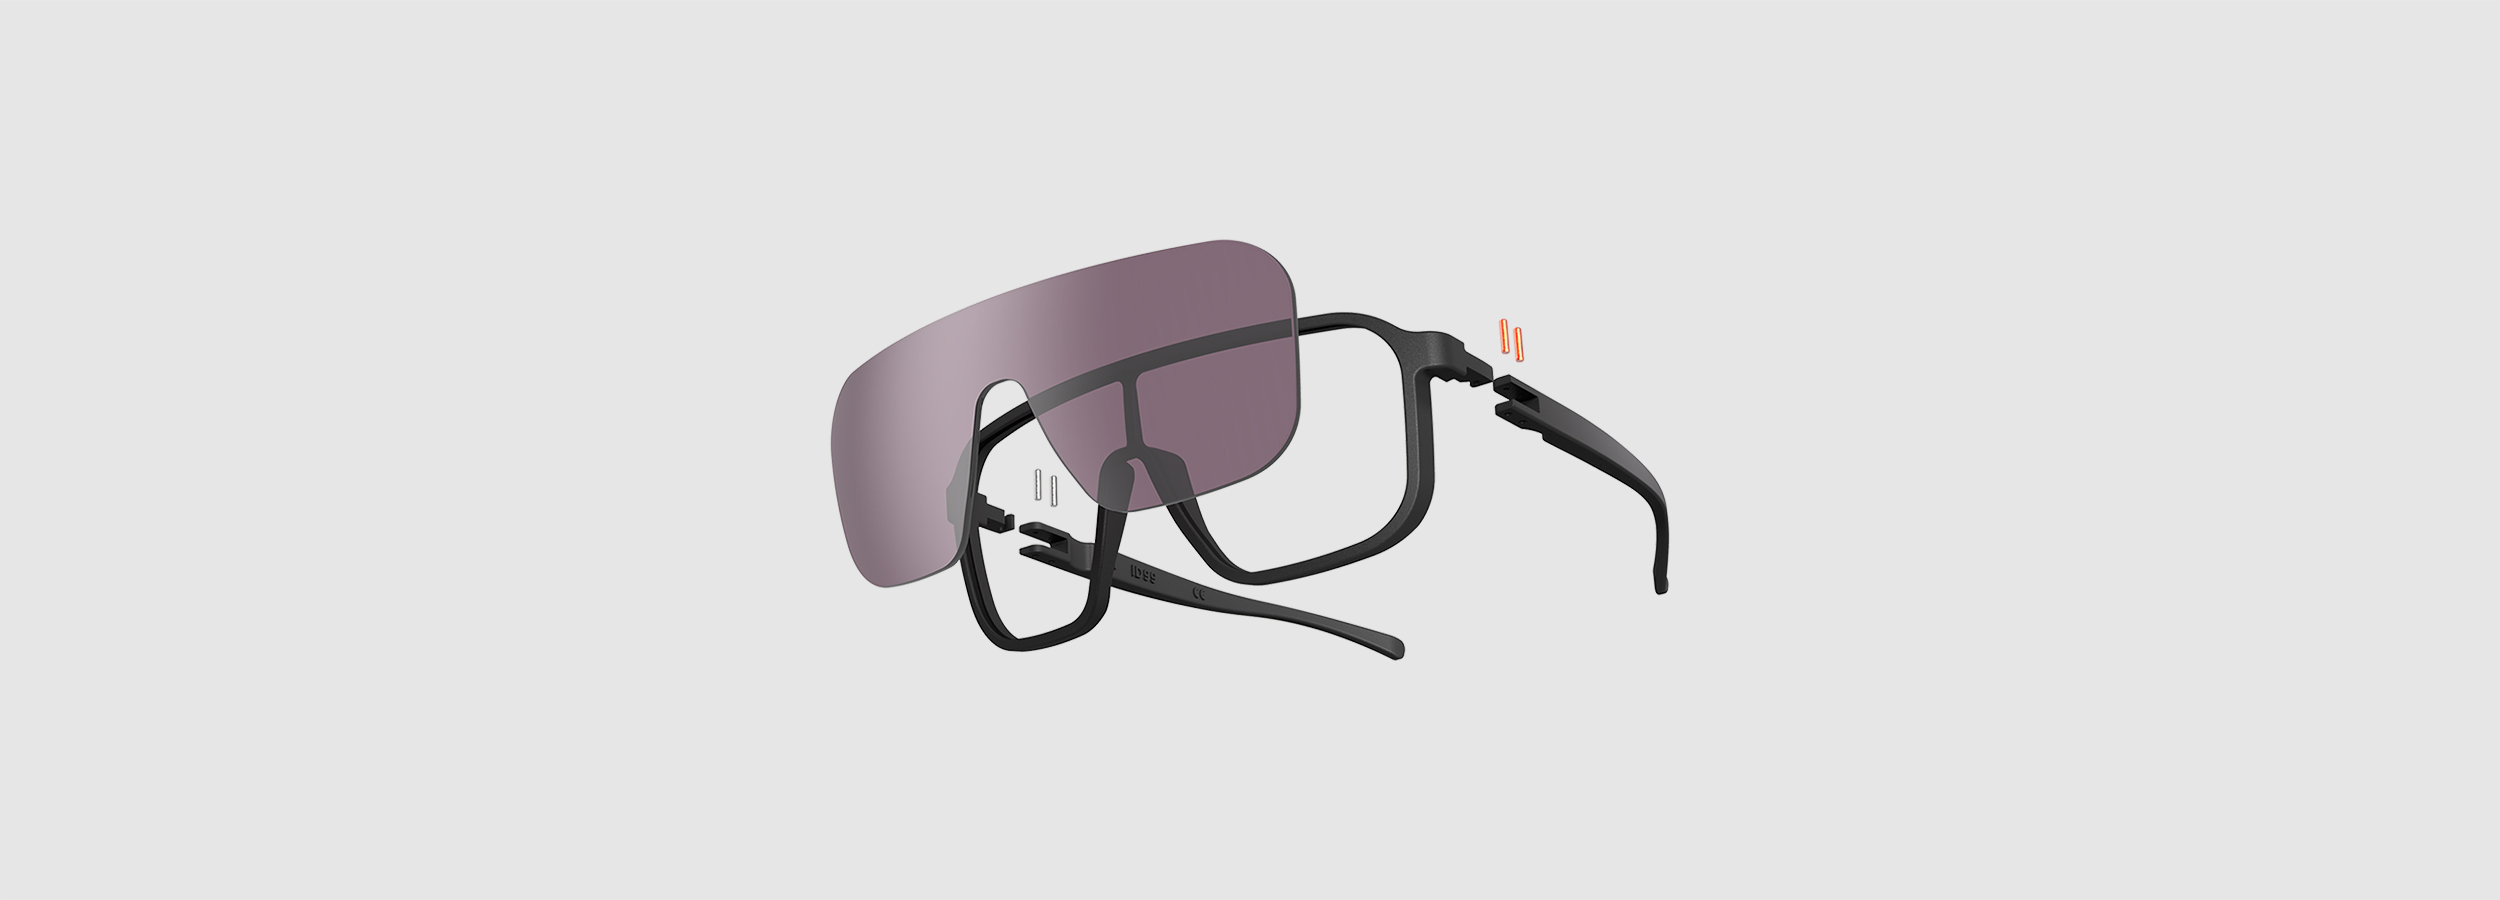 Cycling eyewear design: reduced to the essentials